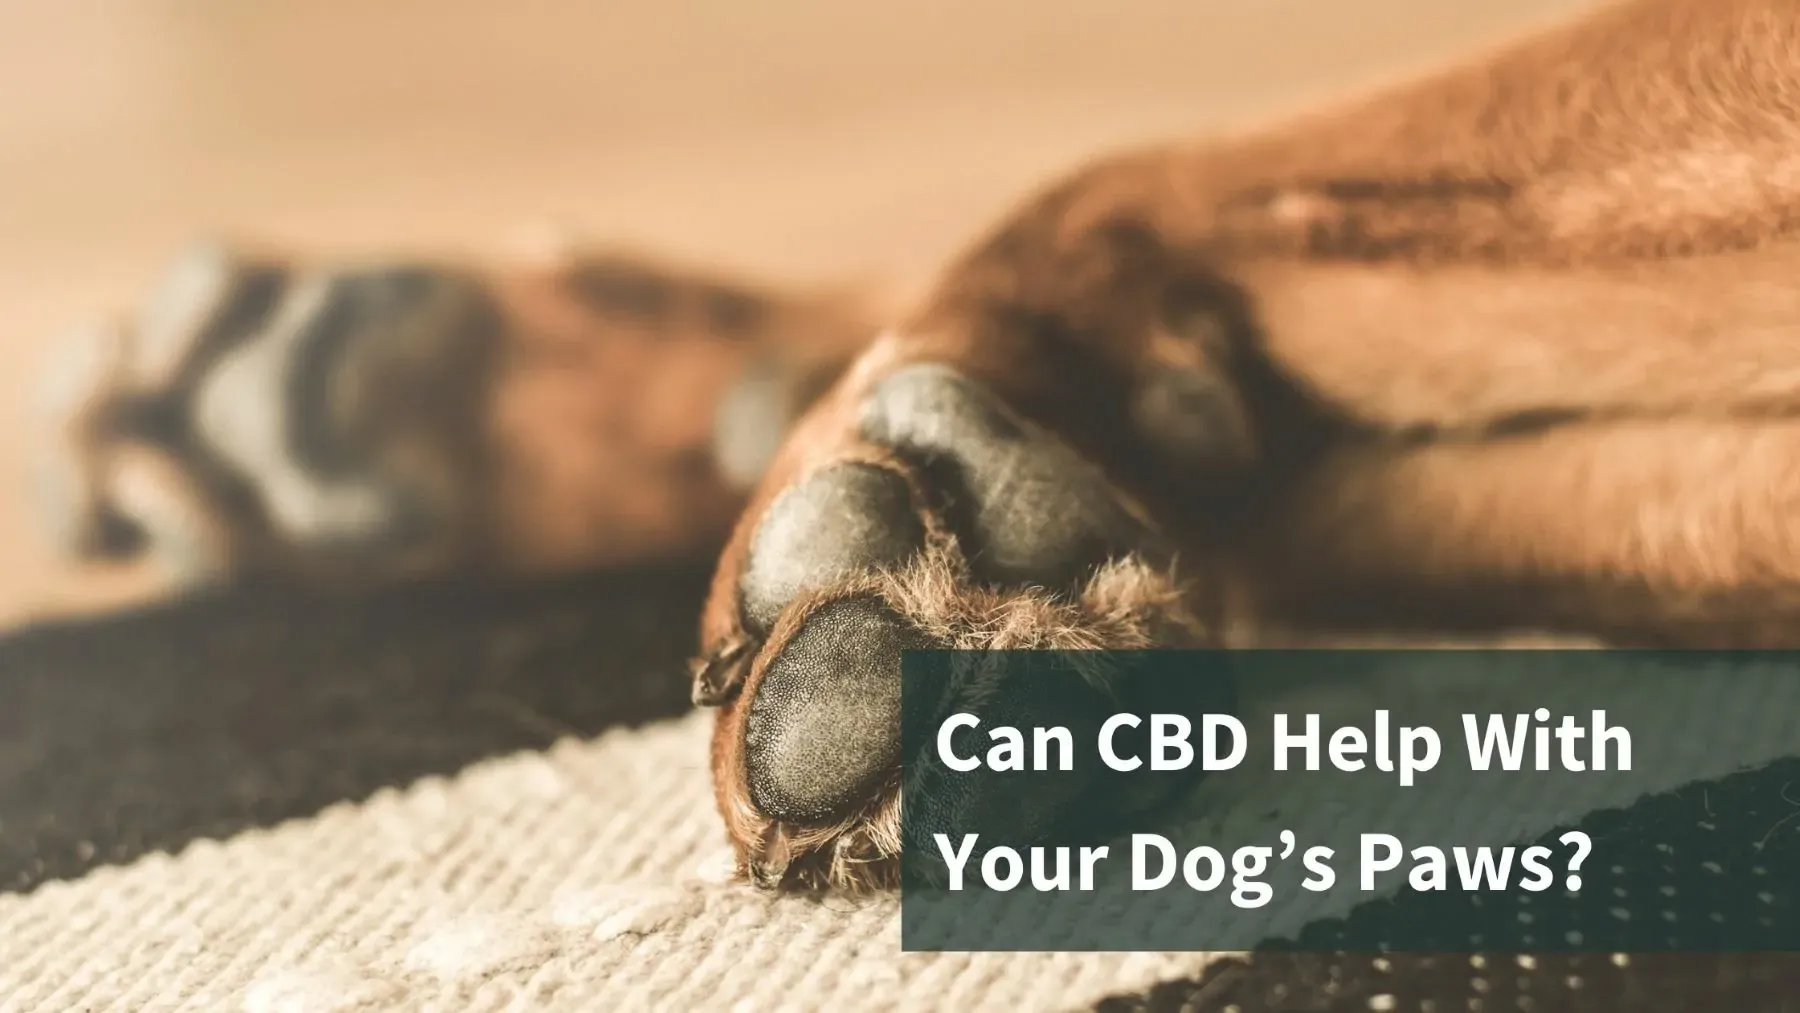 Can You Use CBD For Your Dog’s Paw Pads?